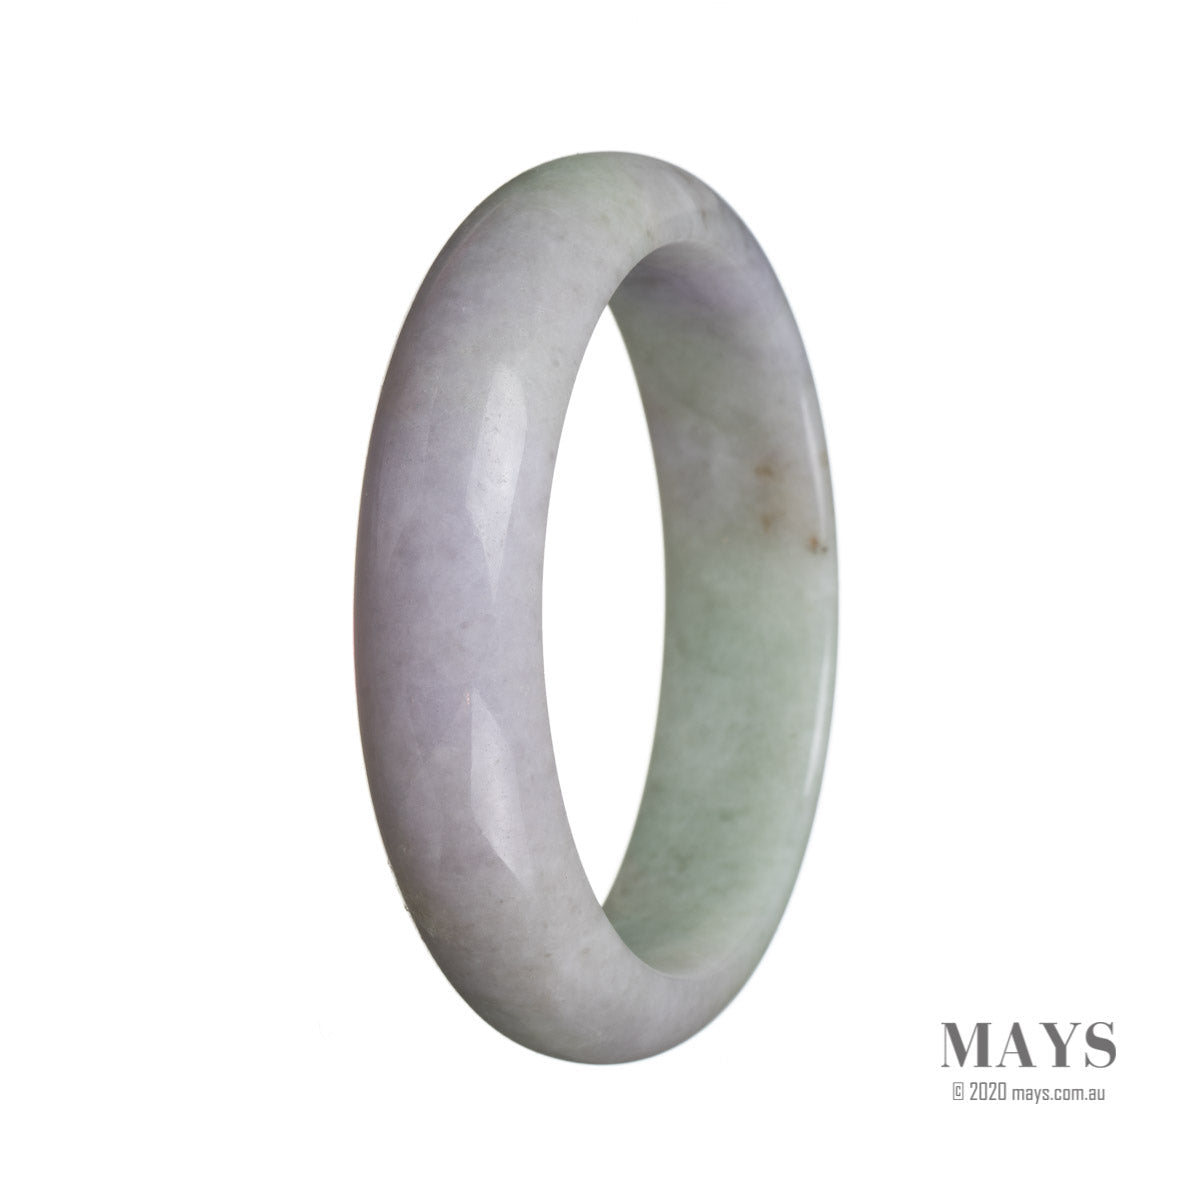 A close-up photo of a jade bangle, showcasing its natural untreated green color with a hint of lavender. The bangle has a half moon shape and measures 58mm in diameter. Created by MAYS™.